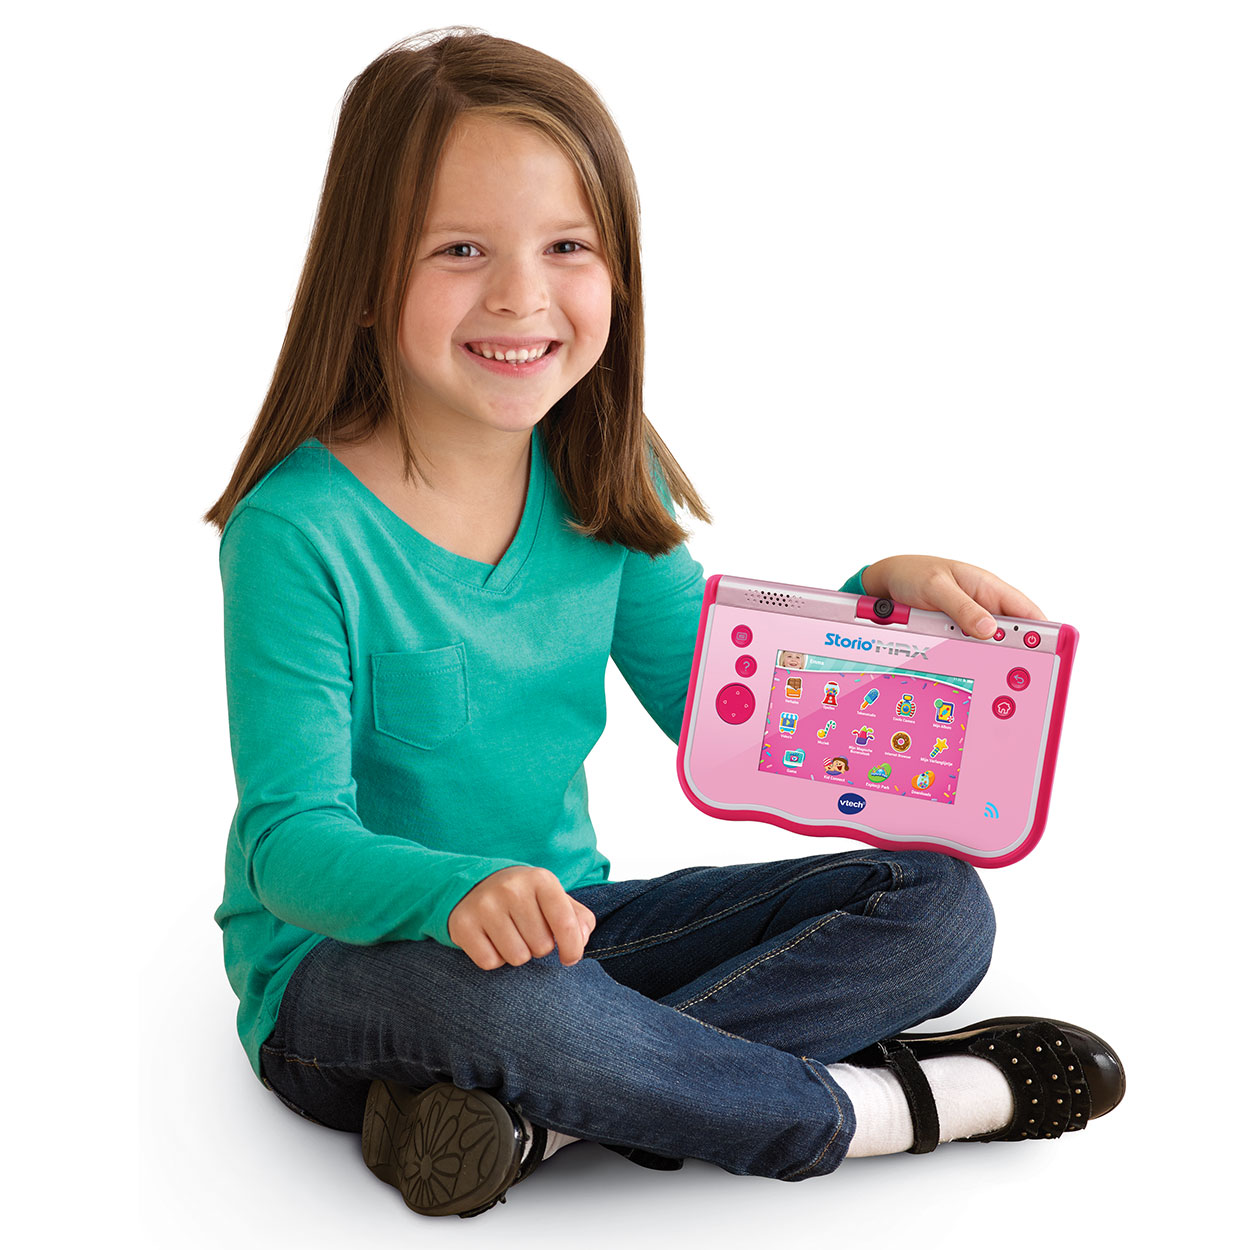 Tablette Storio Max Baby Vtech